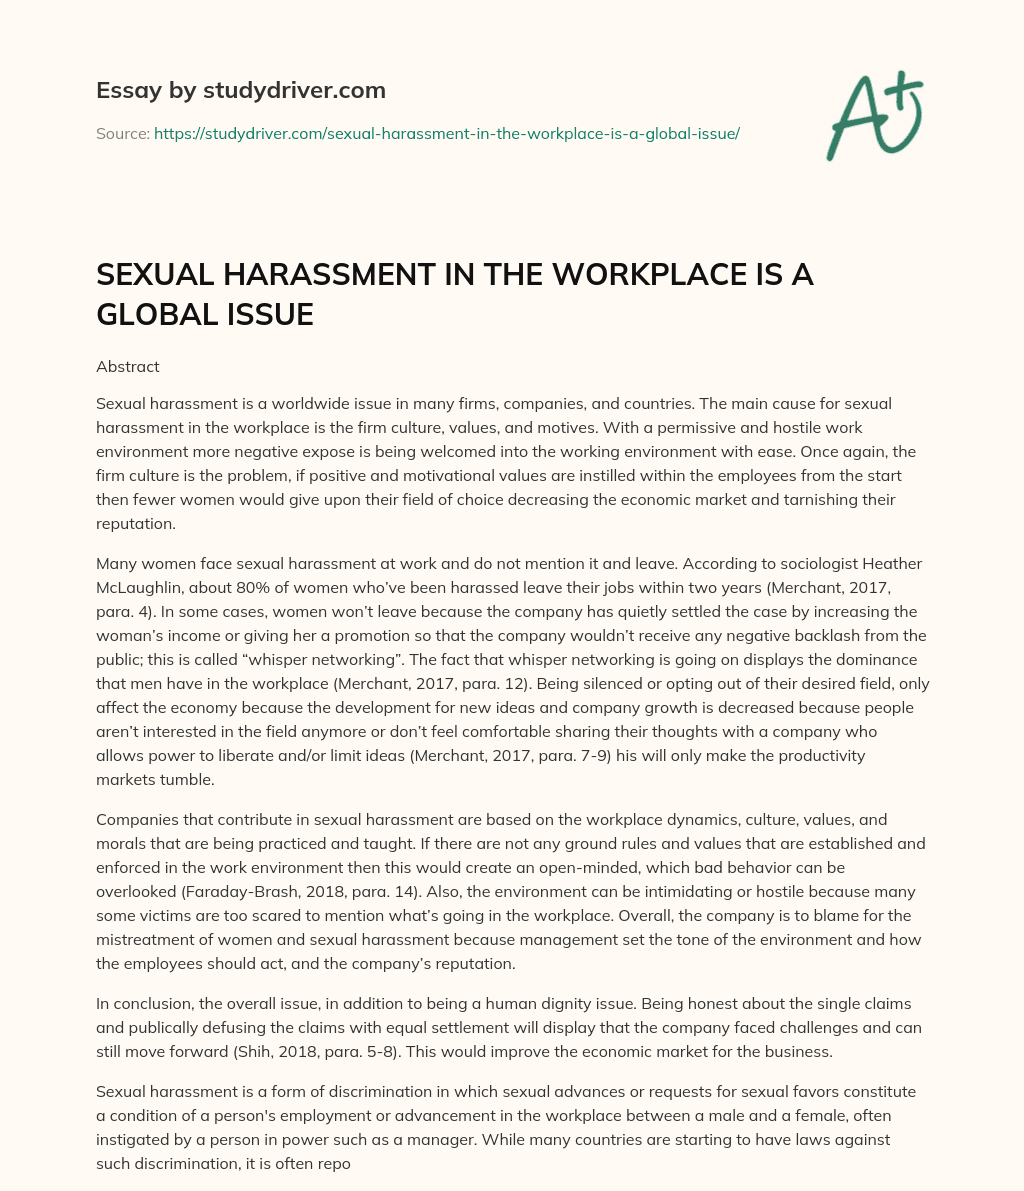 SEXUAL HARASSMENT in the WORKPLACE is a GLOBAL ISSUE essay